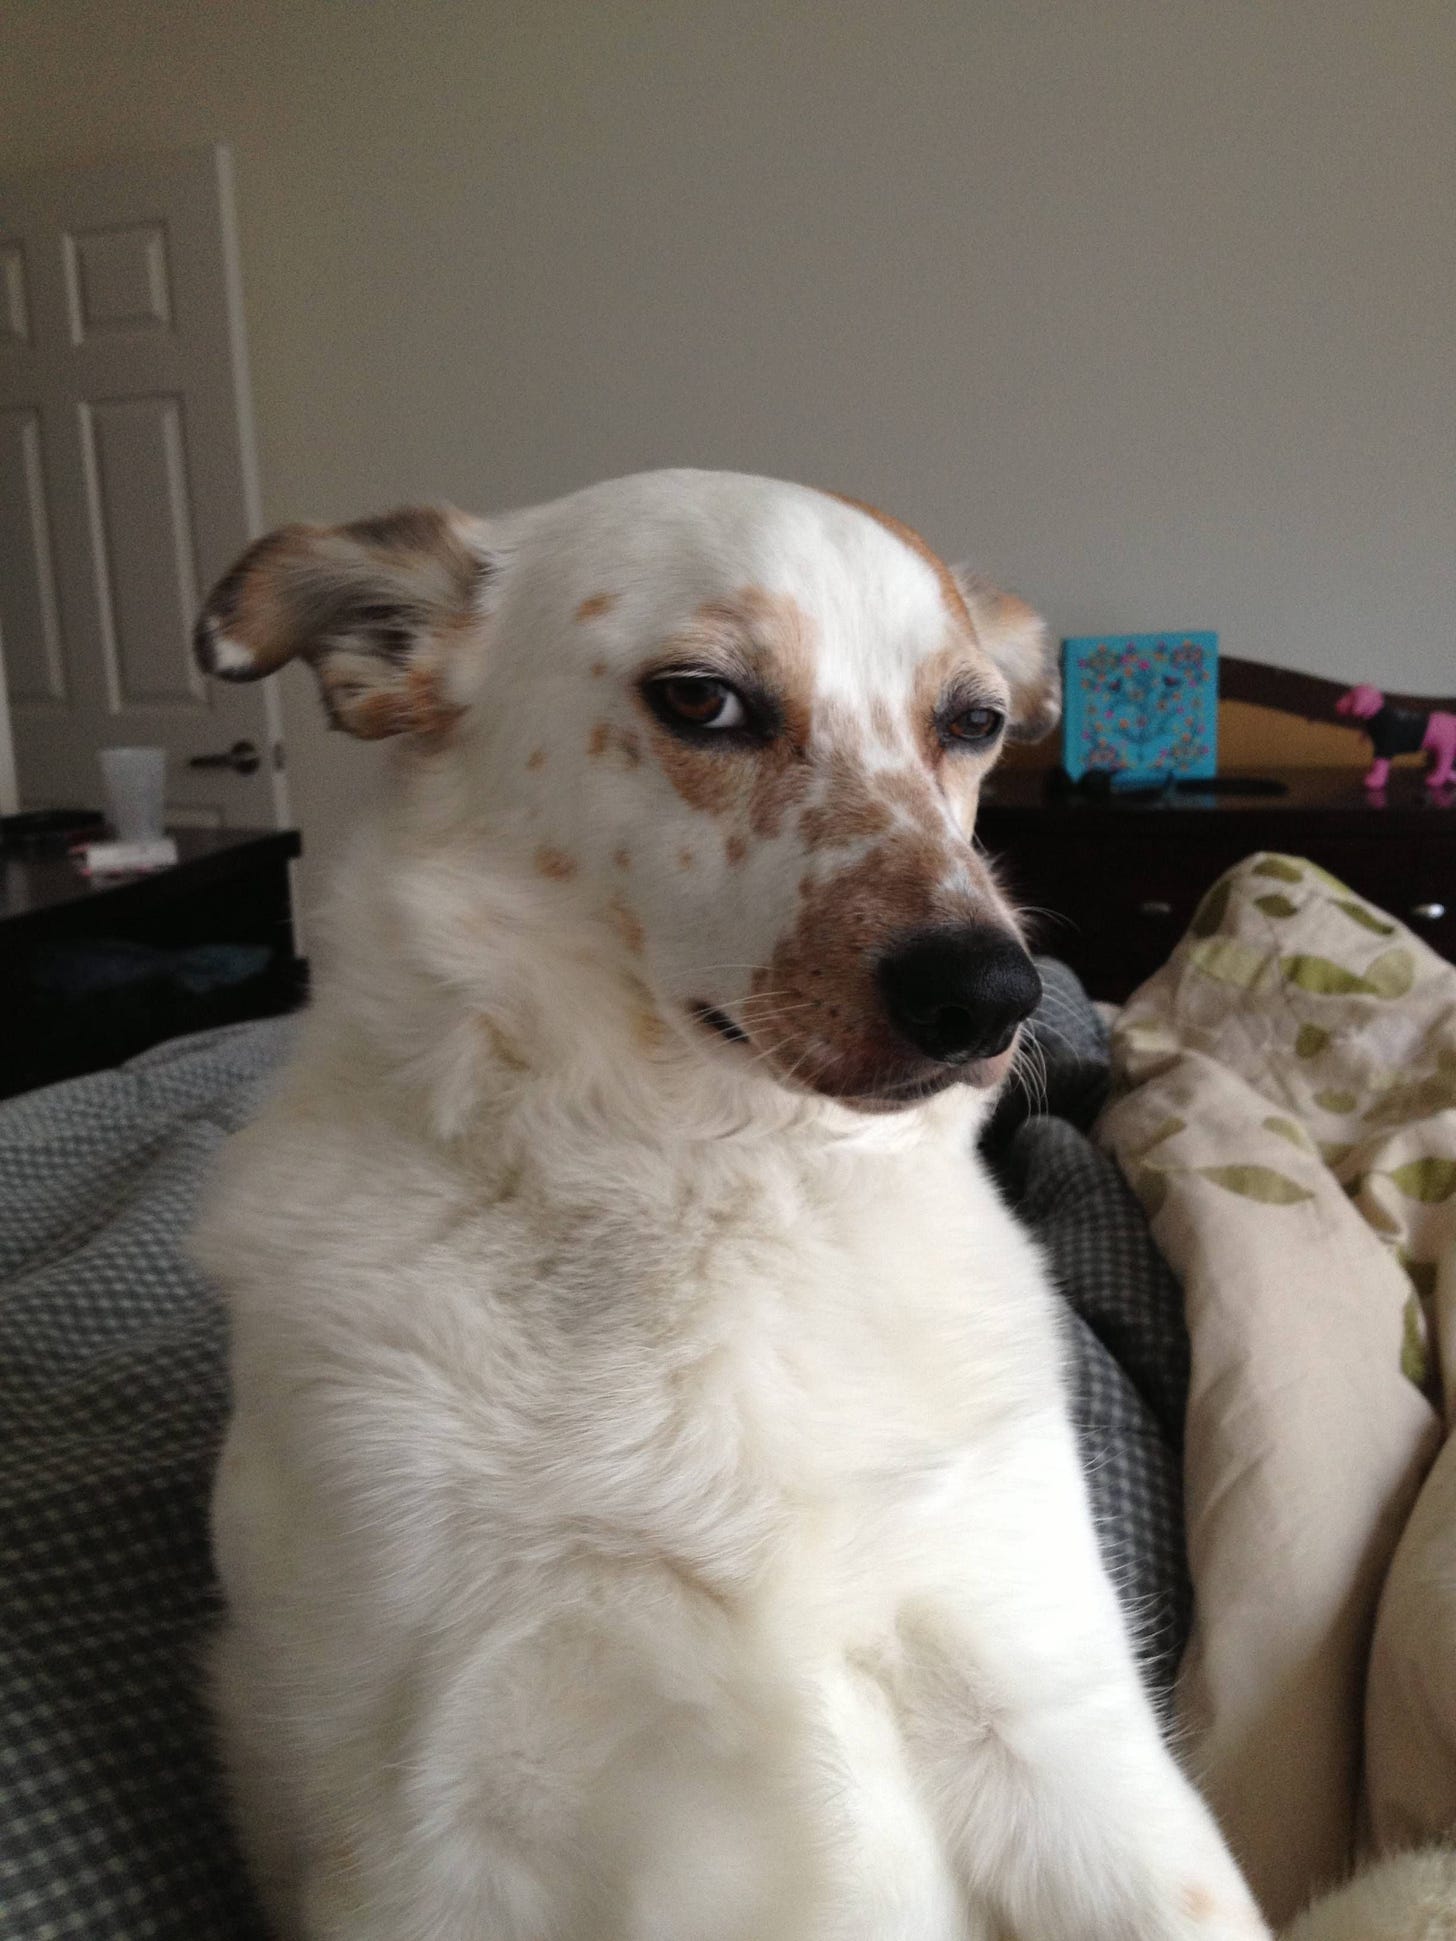 Skeptical dog is skeptical. | Skeptical dogs, Dogs, Dog expressions